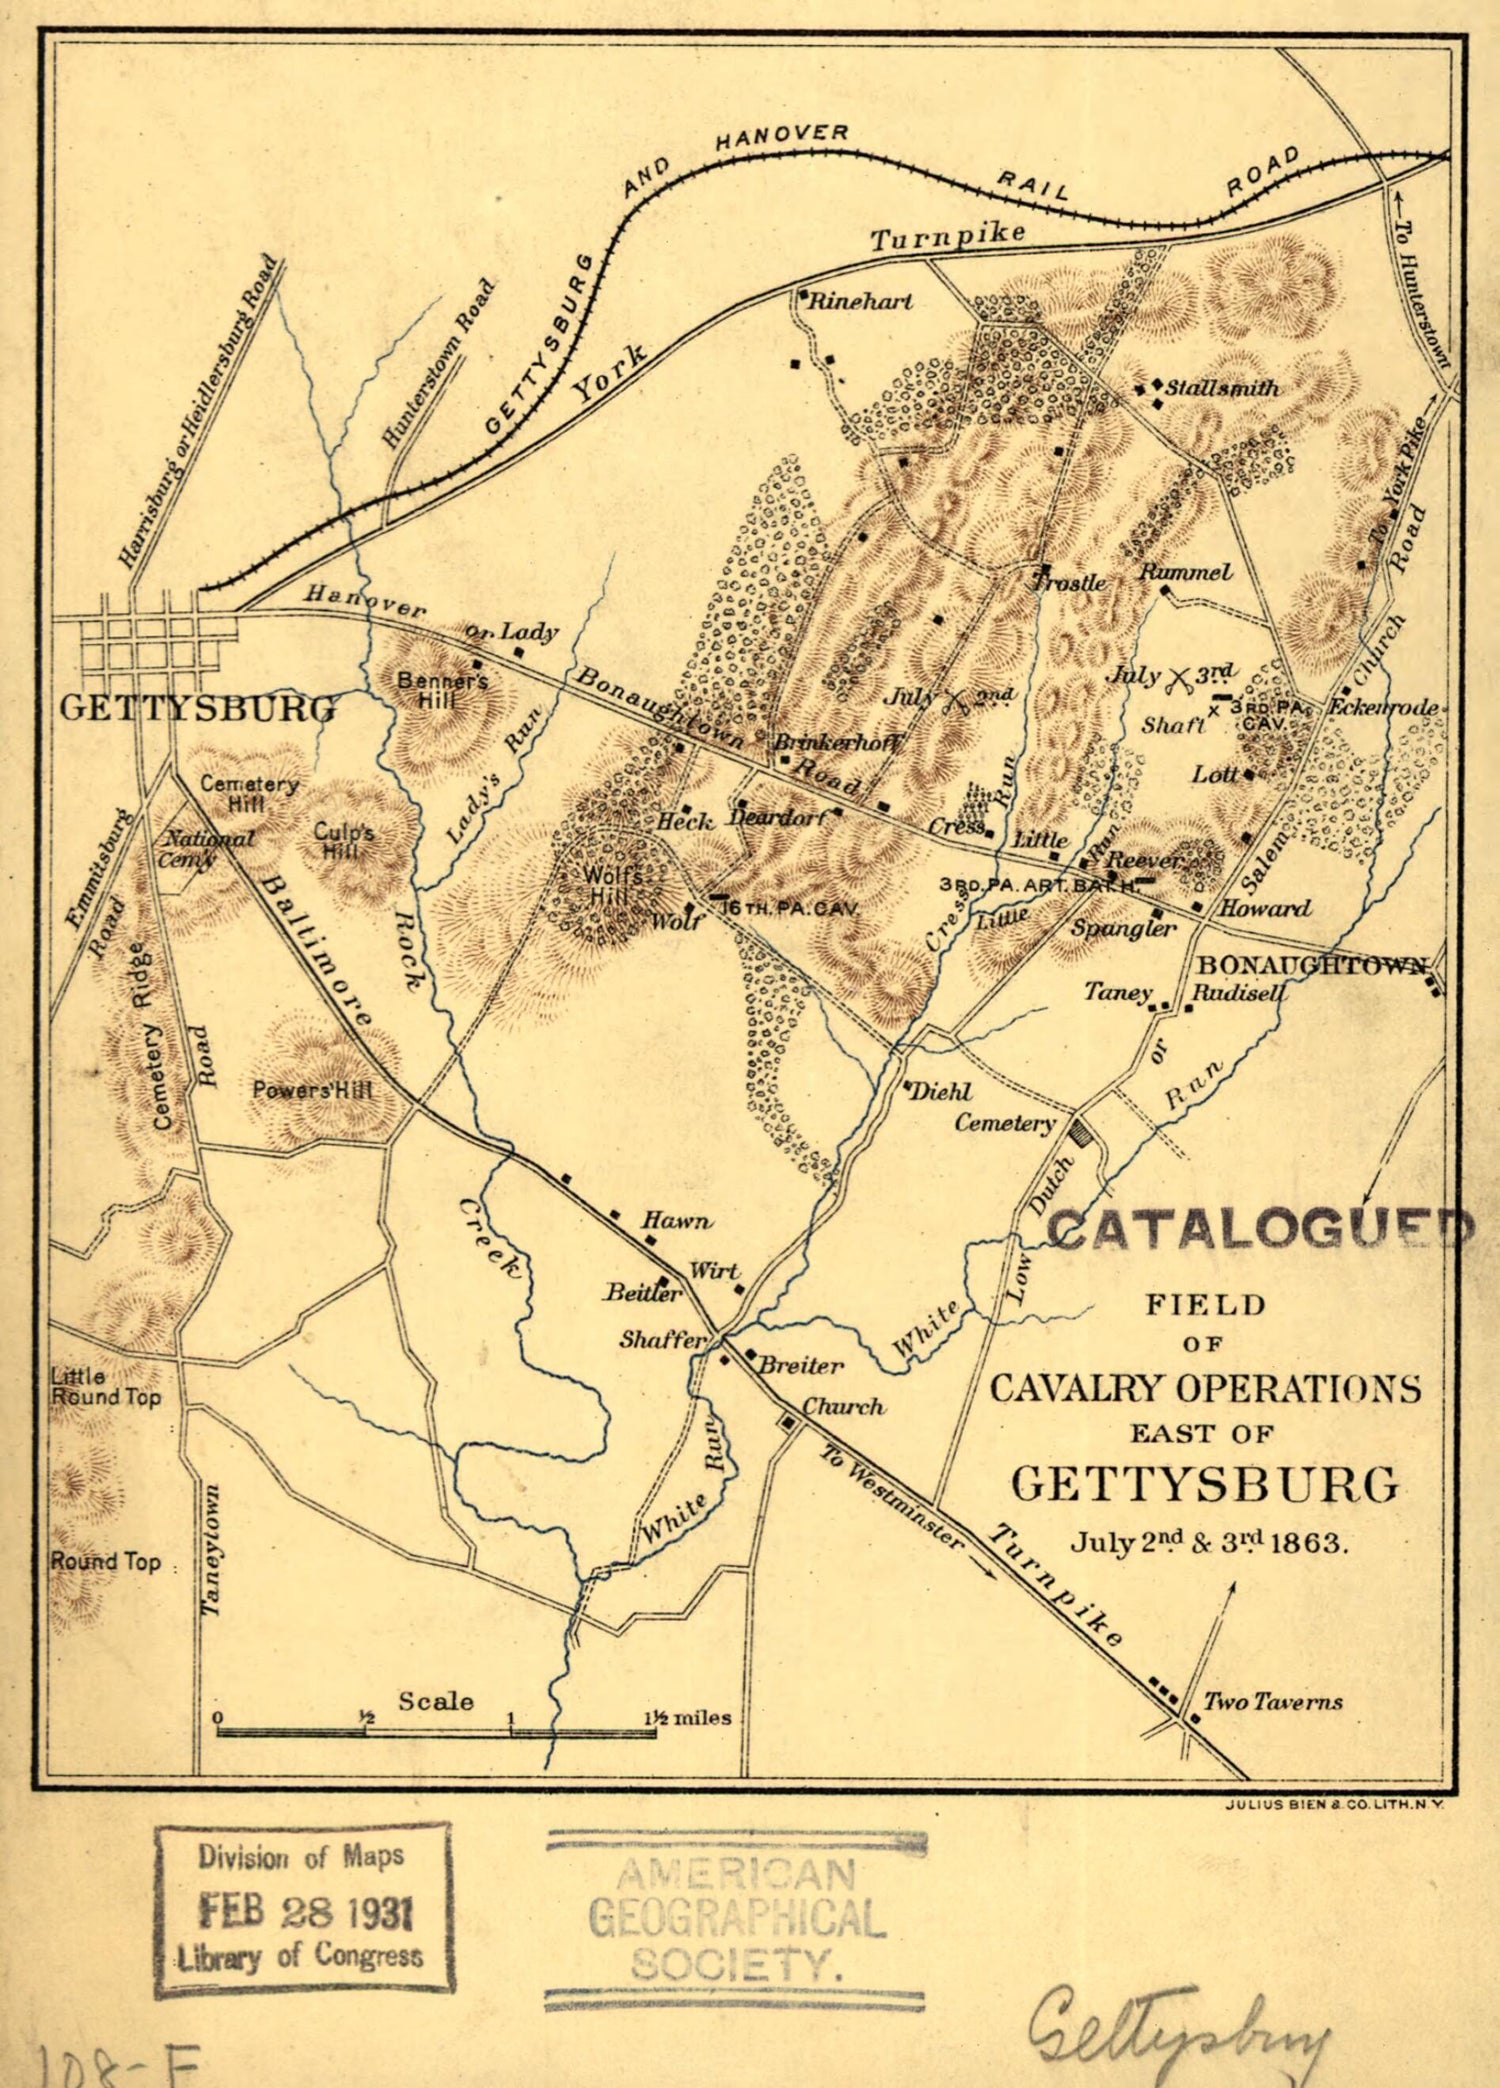 This old map of Field of Cavalry Operations East of Gettysburg, July 2nd &amp; 3rd from 1863 was created by Julius Bien in 1863